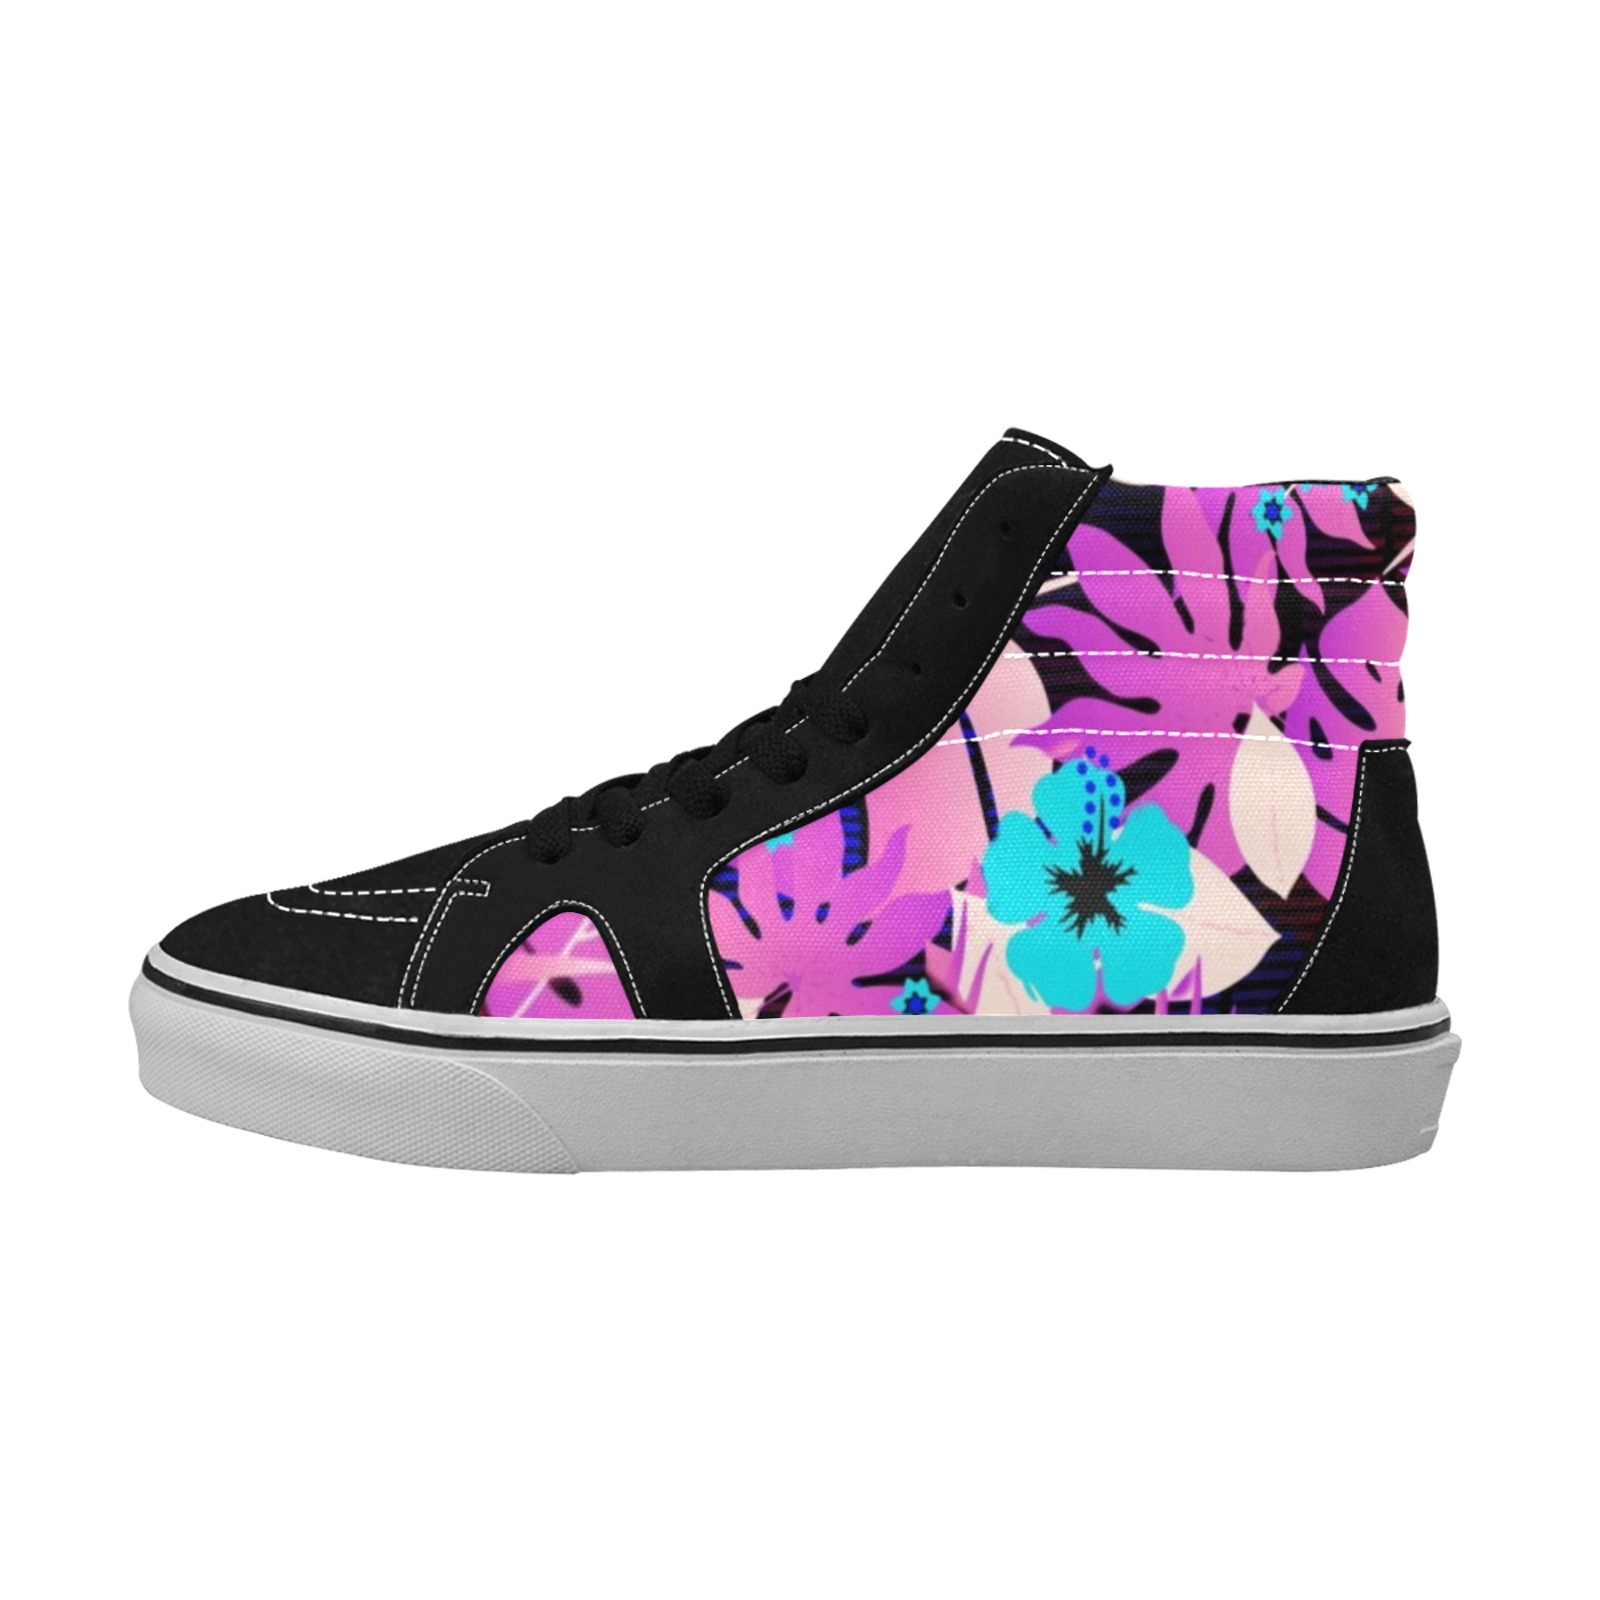 GROOVY FUNK THING FLORAL PURPLE Women's High Top Skateboarding Shoes (Model E001-1)